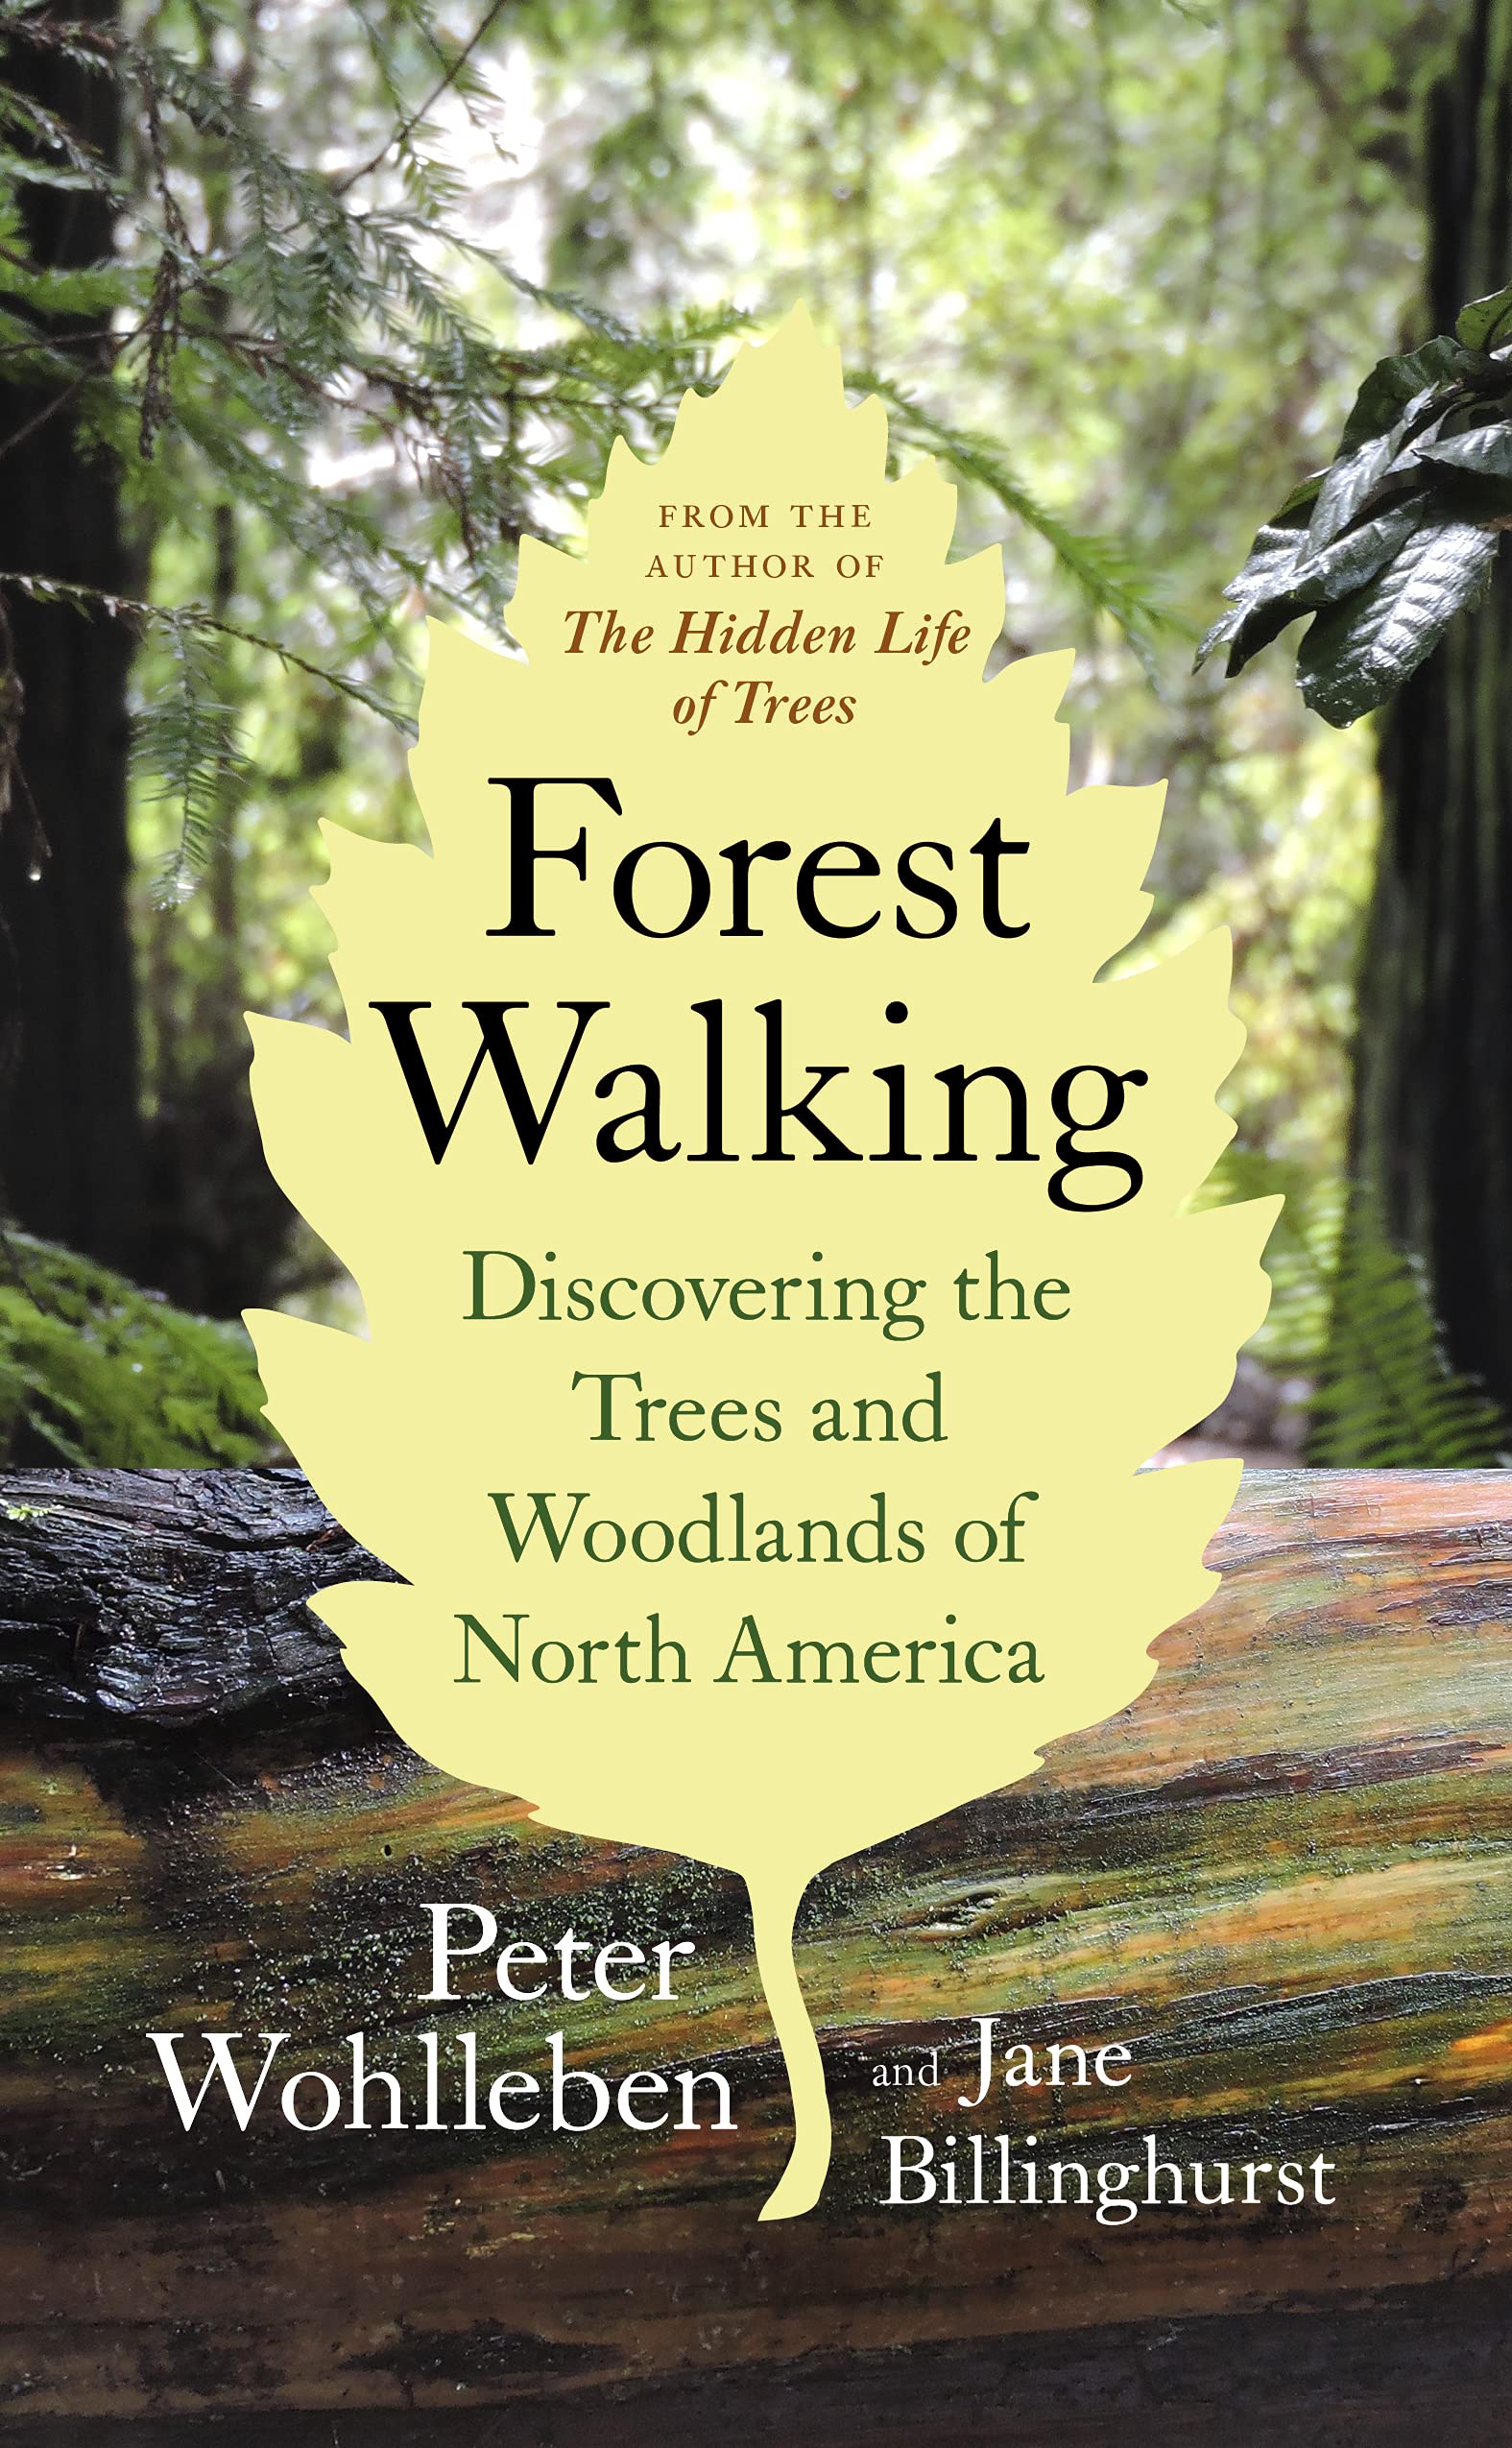 Forest Walking: Discovering the Trees and Woodlands of North America by Peter Wohlleben  and Jane Billinghurst  cover